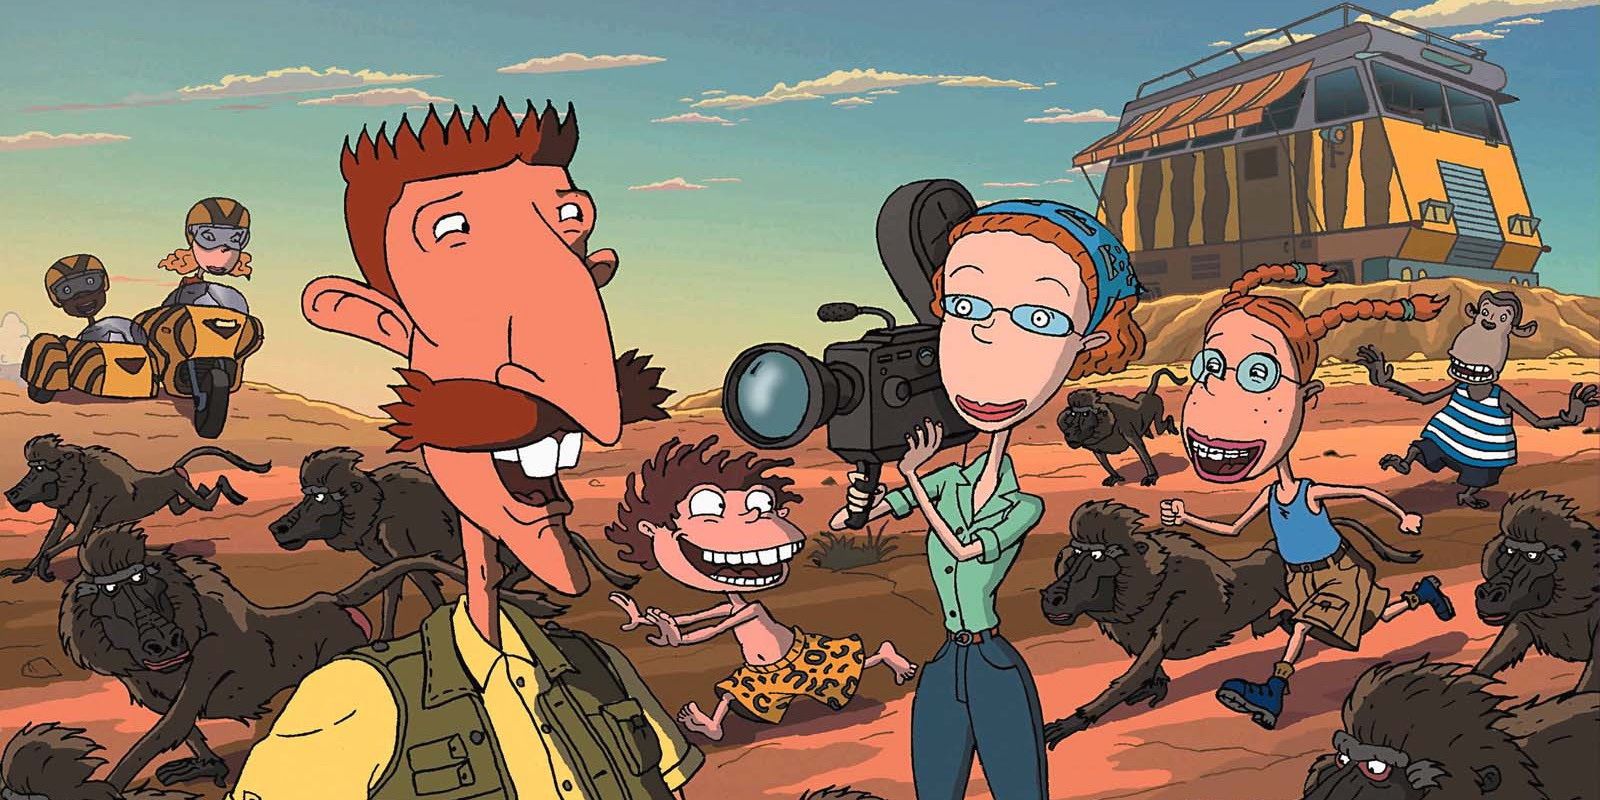 A scene from The Wild Thornberrys